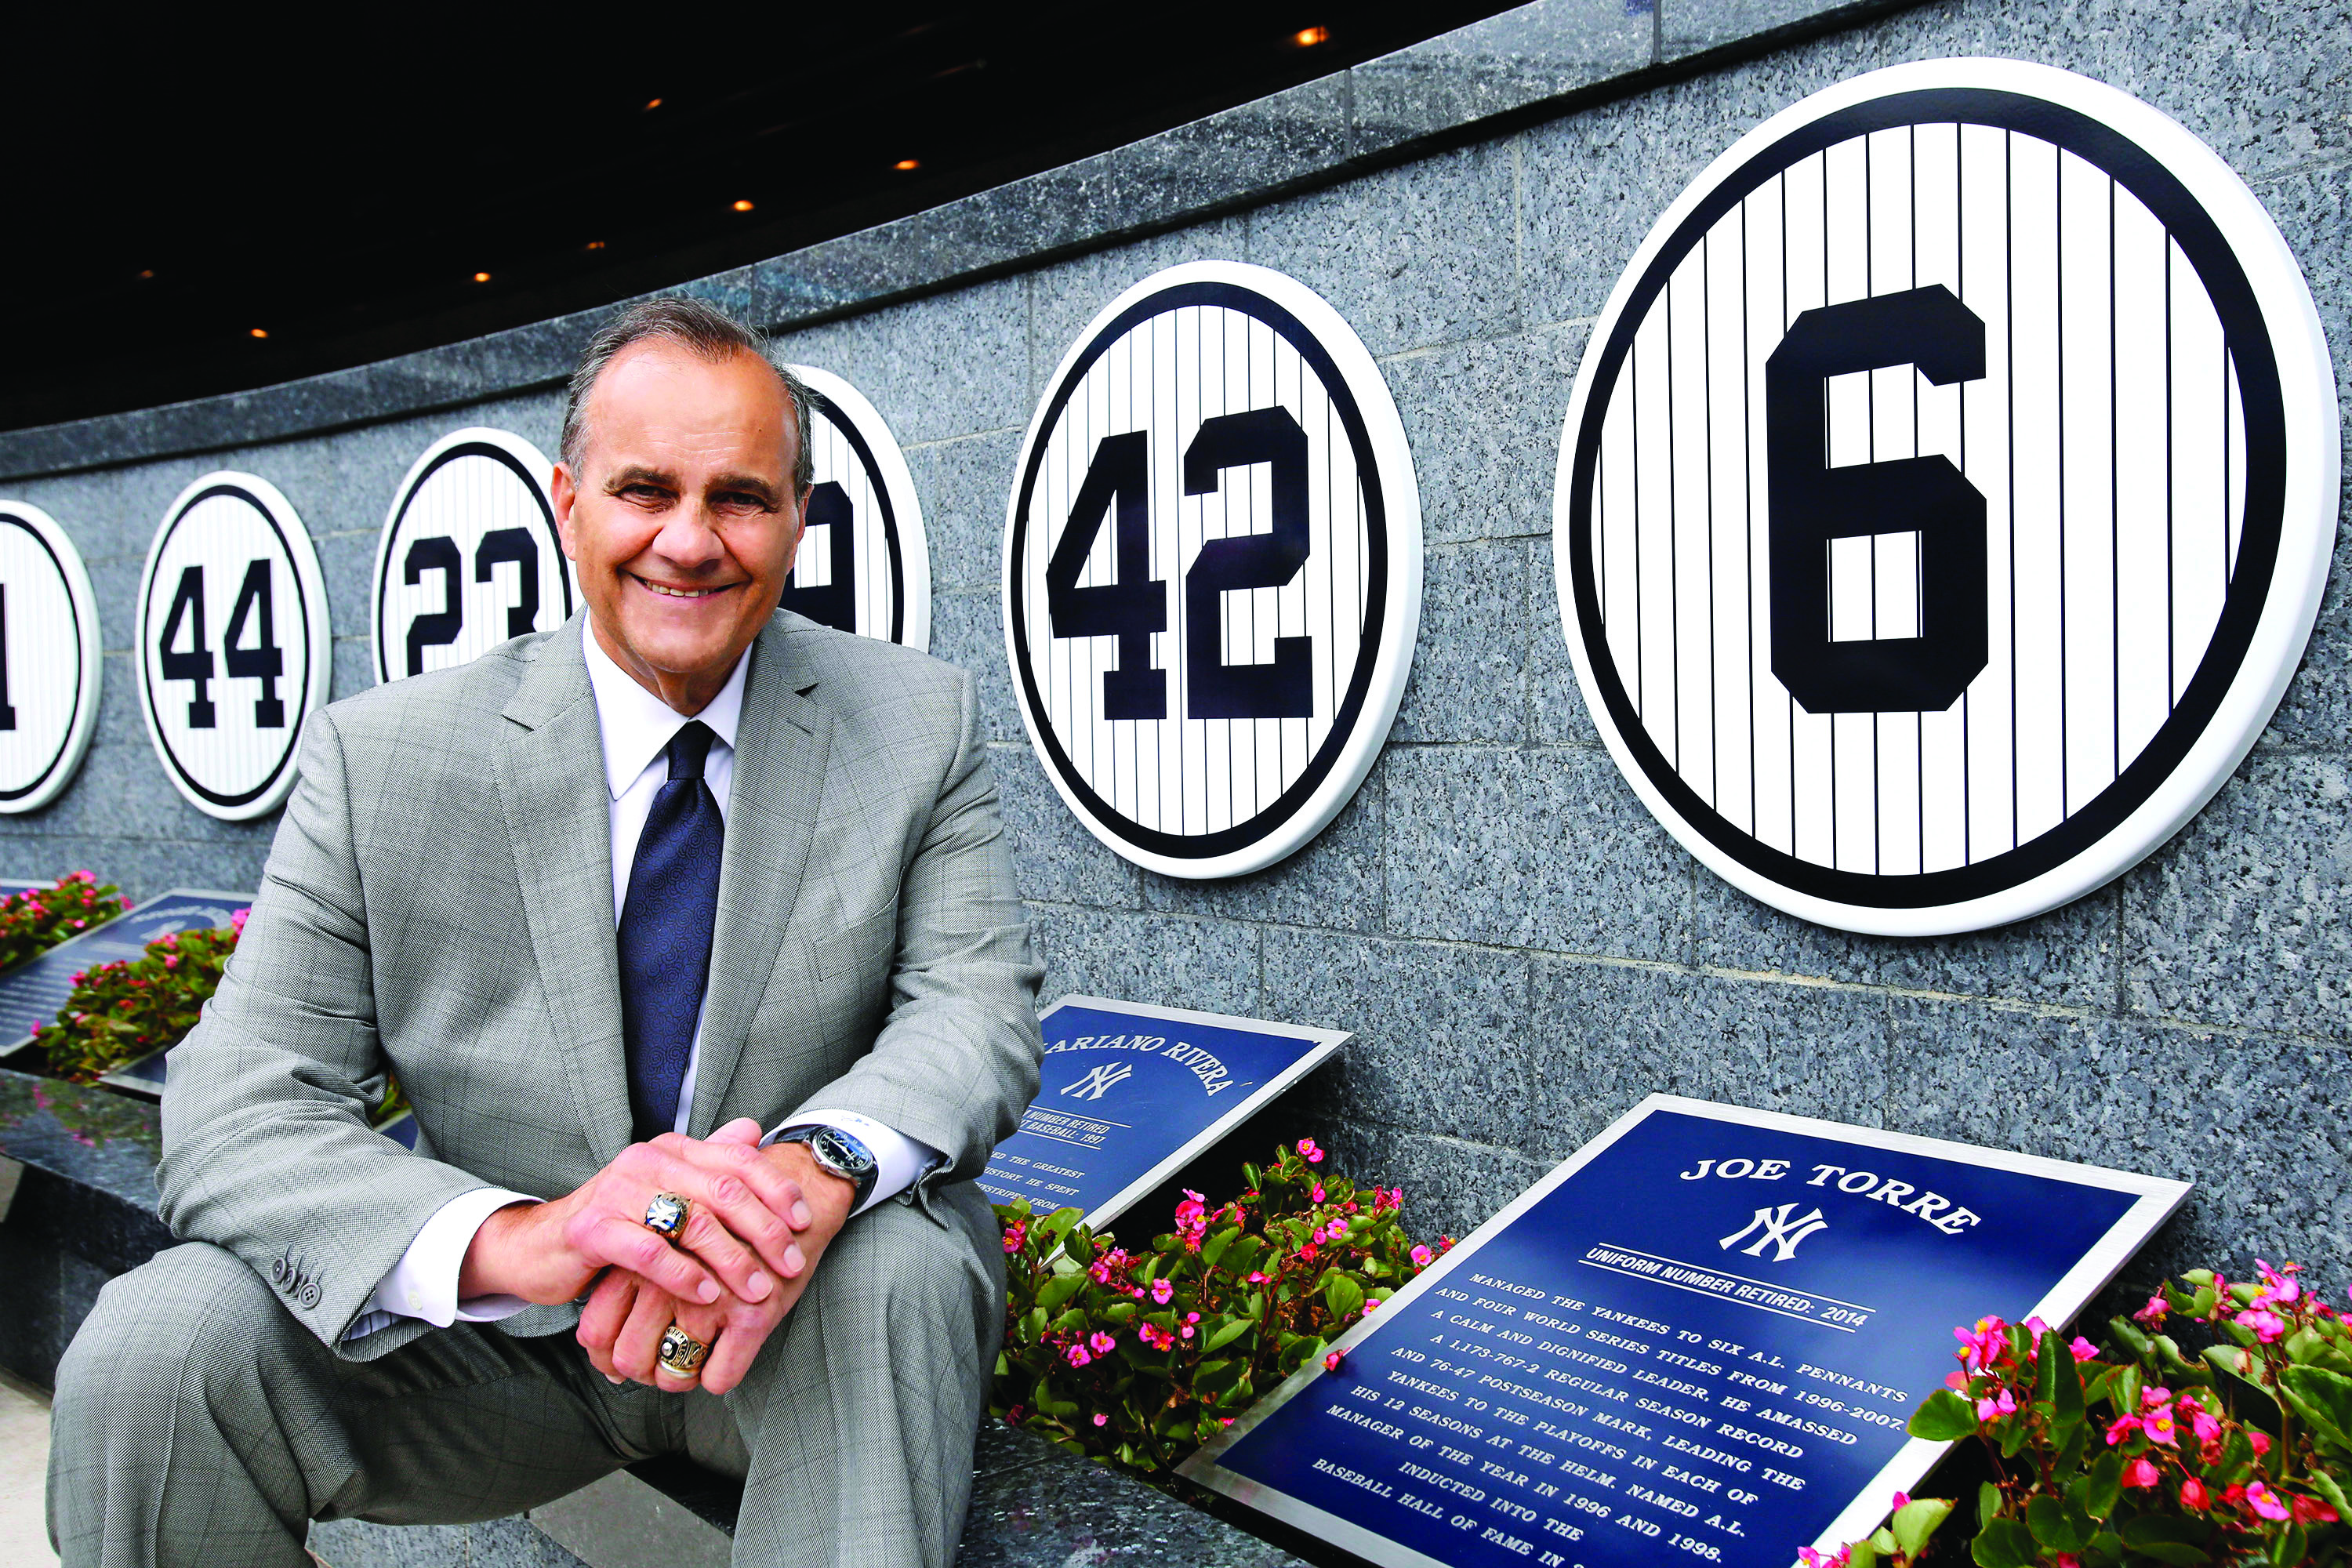 Joe Torre To Receive Lifetime Achievement Award For Sportsmanship At Musial  Awards Nov. 22 - Musial Awards